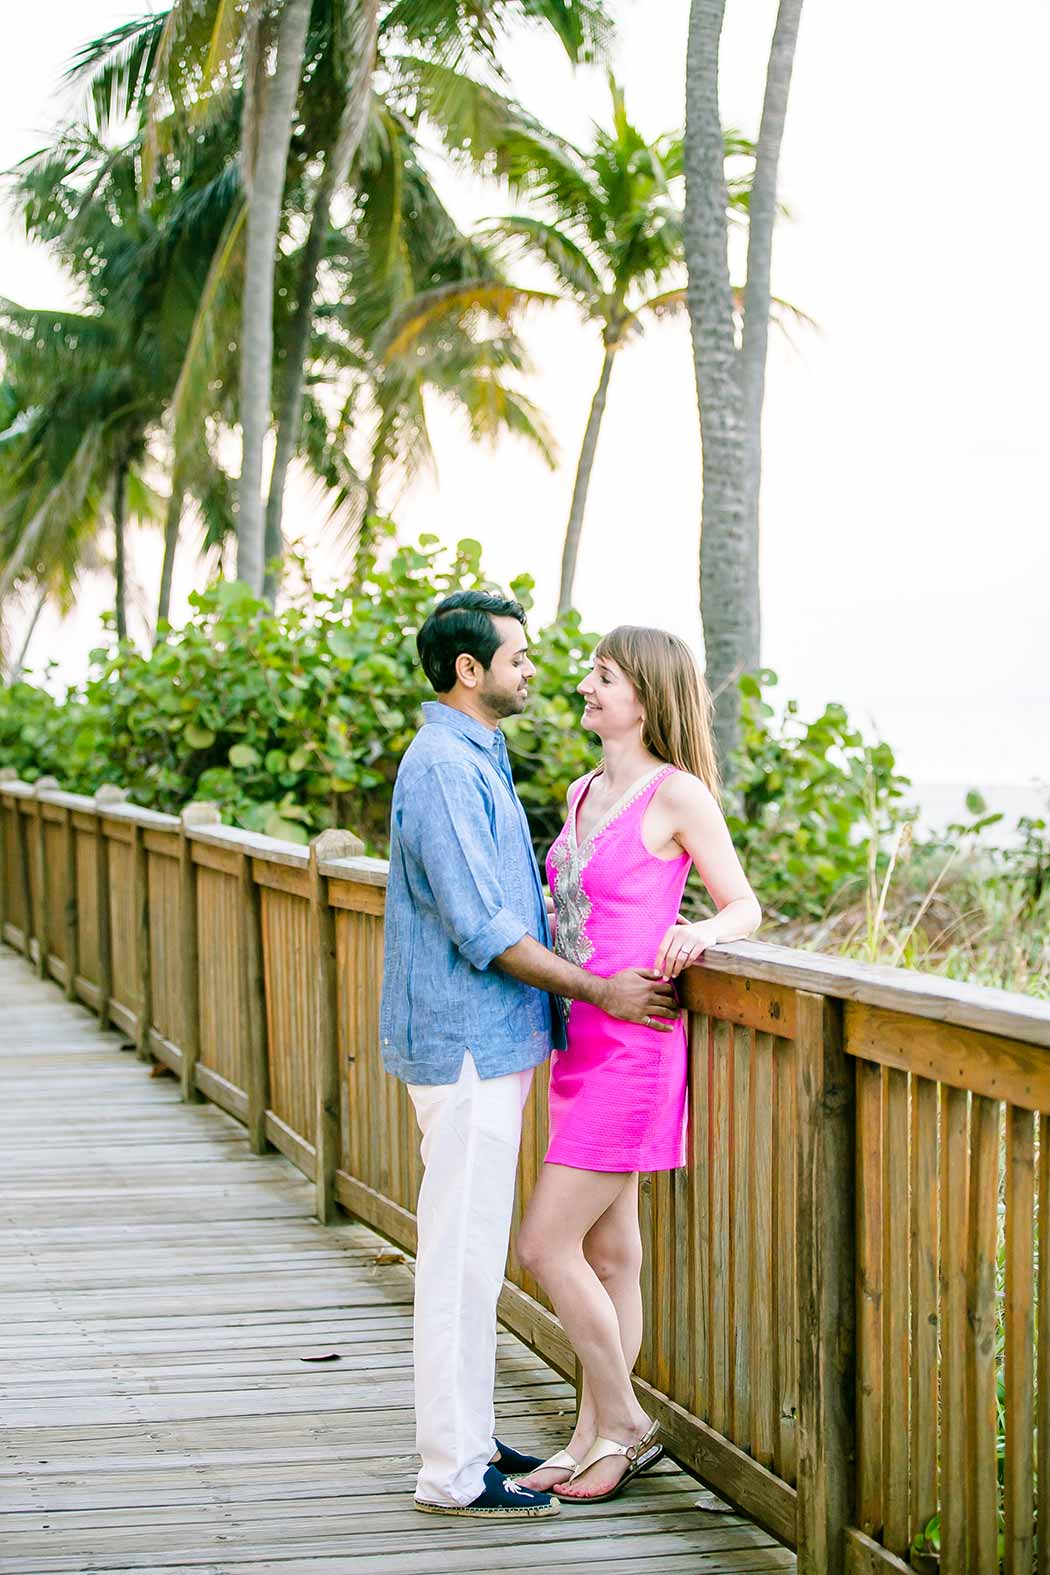 engaged couple walk on wooden walkway | fort lauderdale beach engagement | beach engagement photography fort lauderdale | beach walkway photoshoot in south florida